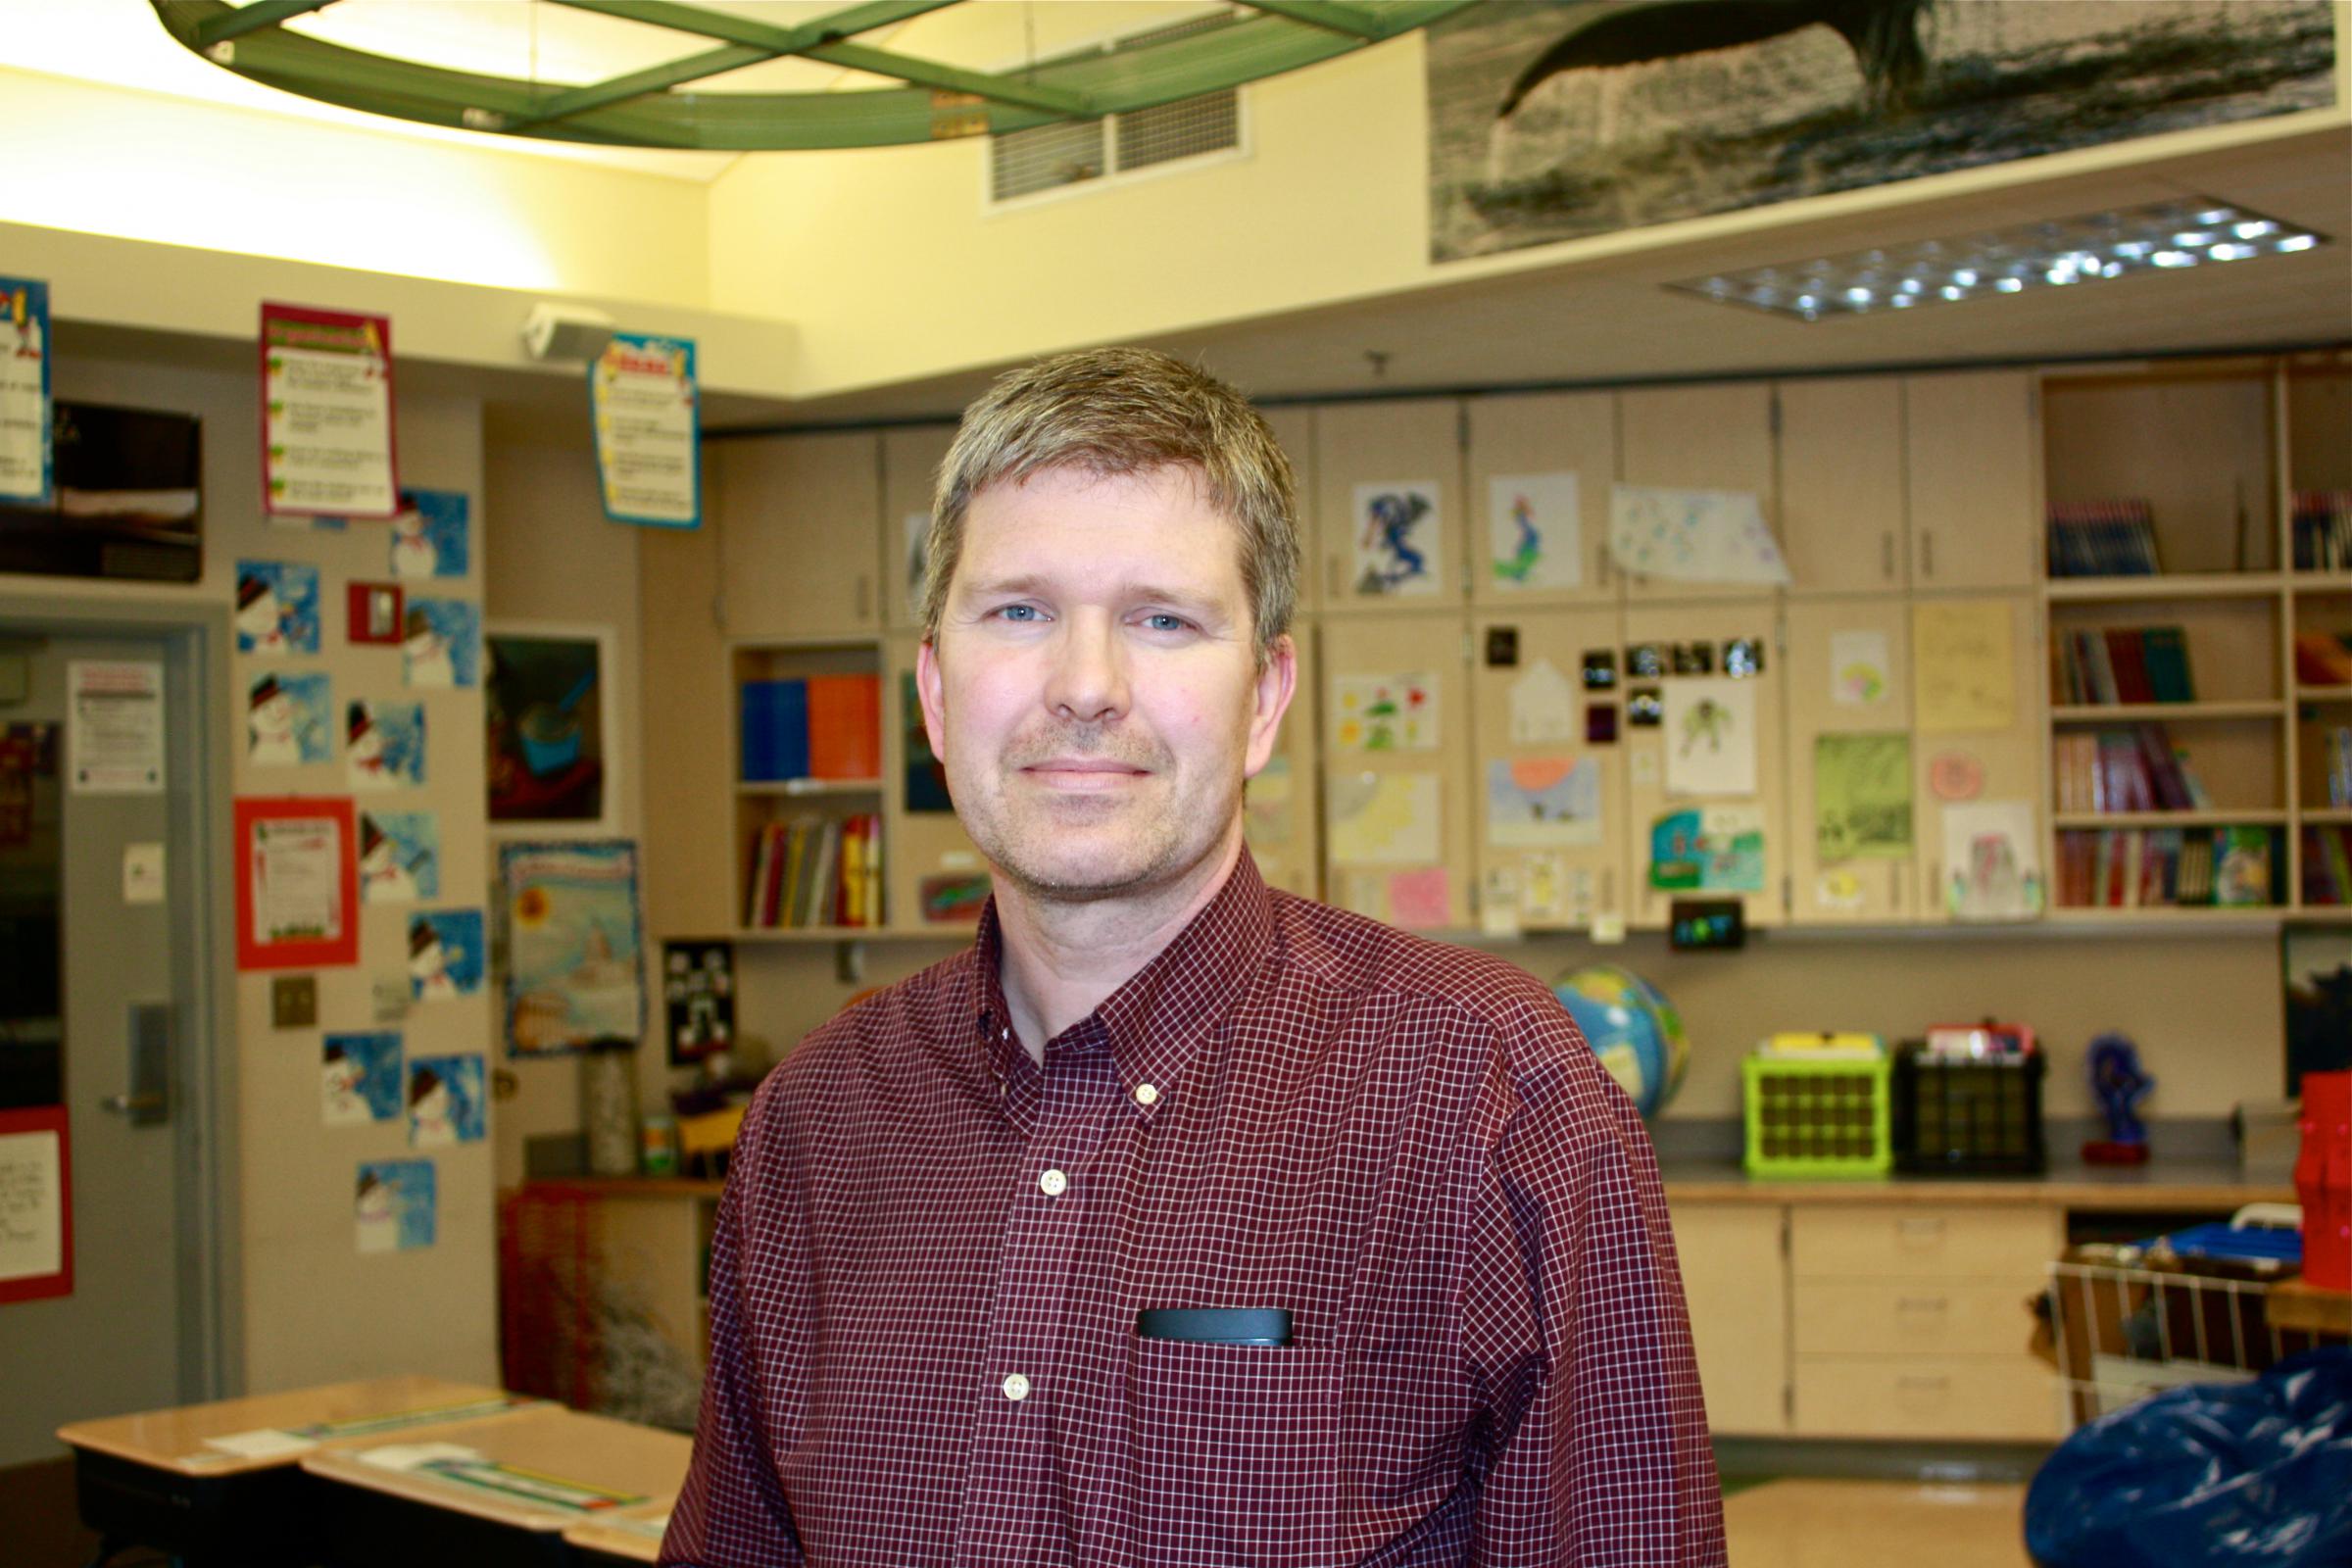 Eagle’s View Elementary Achigaalux Principal Eric Andersen is leaving Unalaska in June after more than 15 years at the school. (Photo by Annie Ropeik/KUCB)